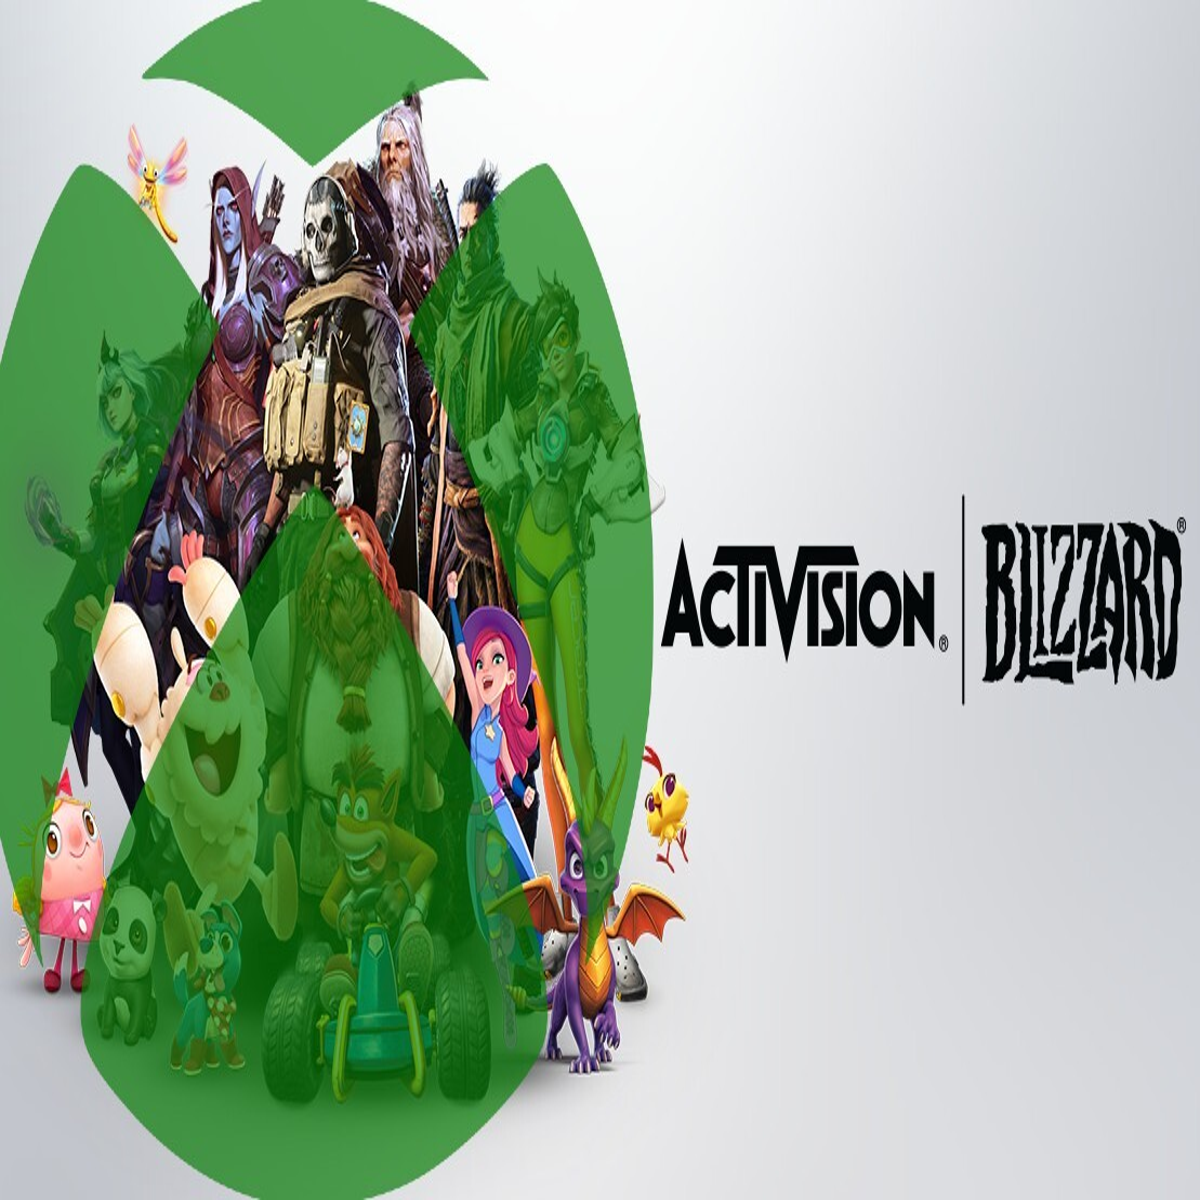 Microsoft to stream all current and future Activision Blizzard